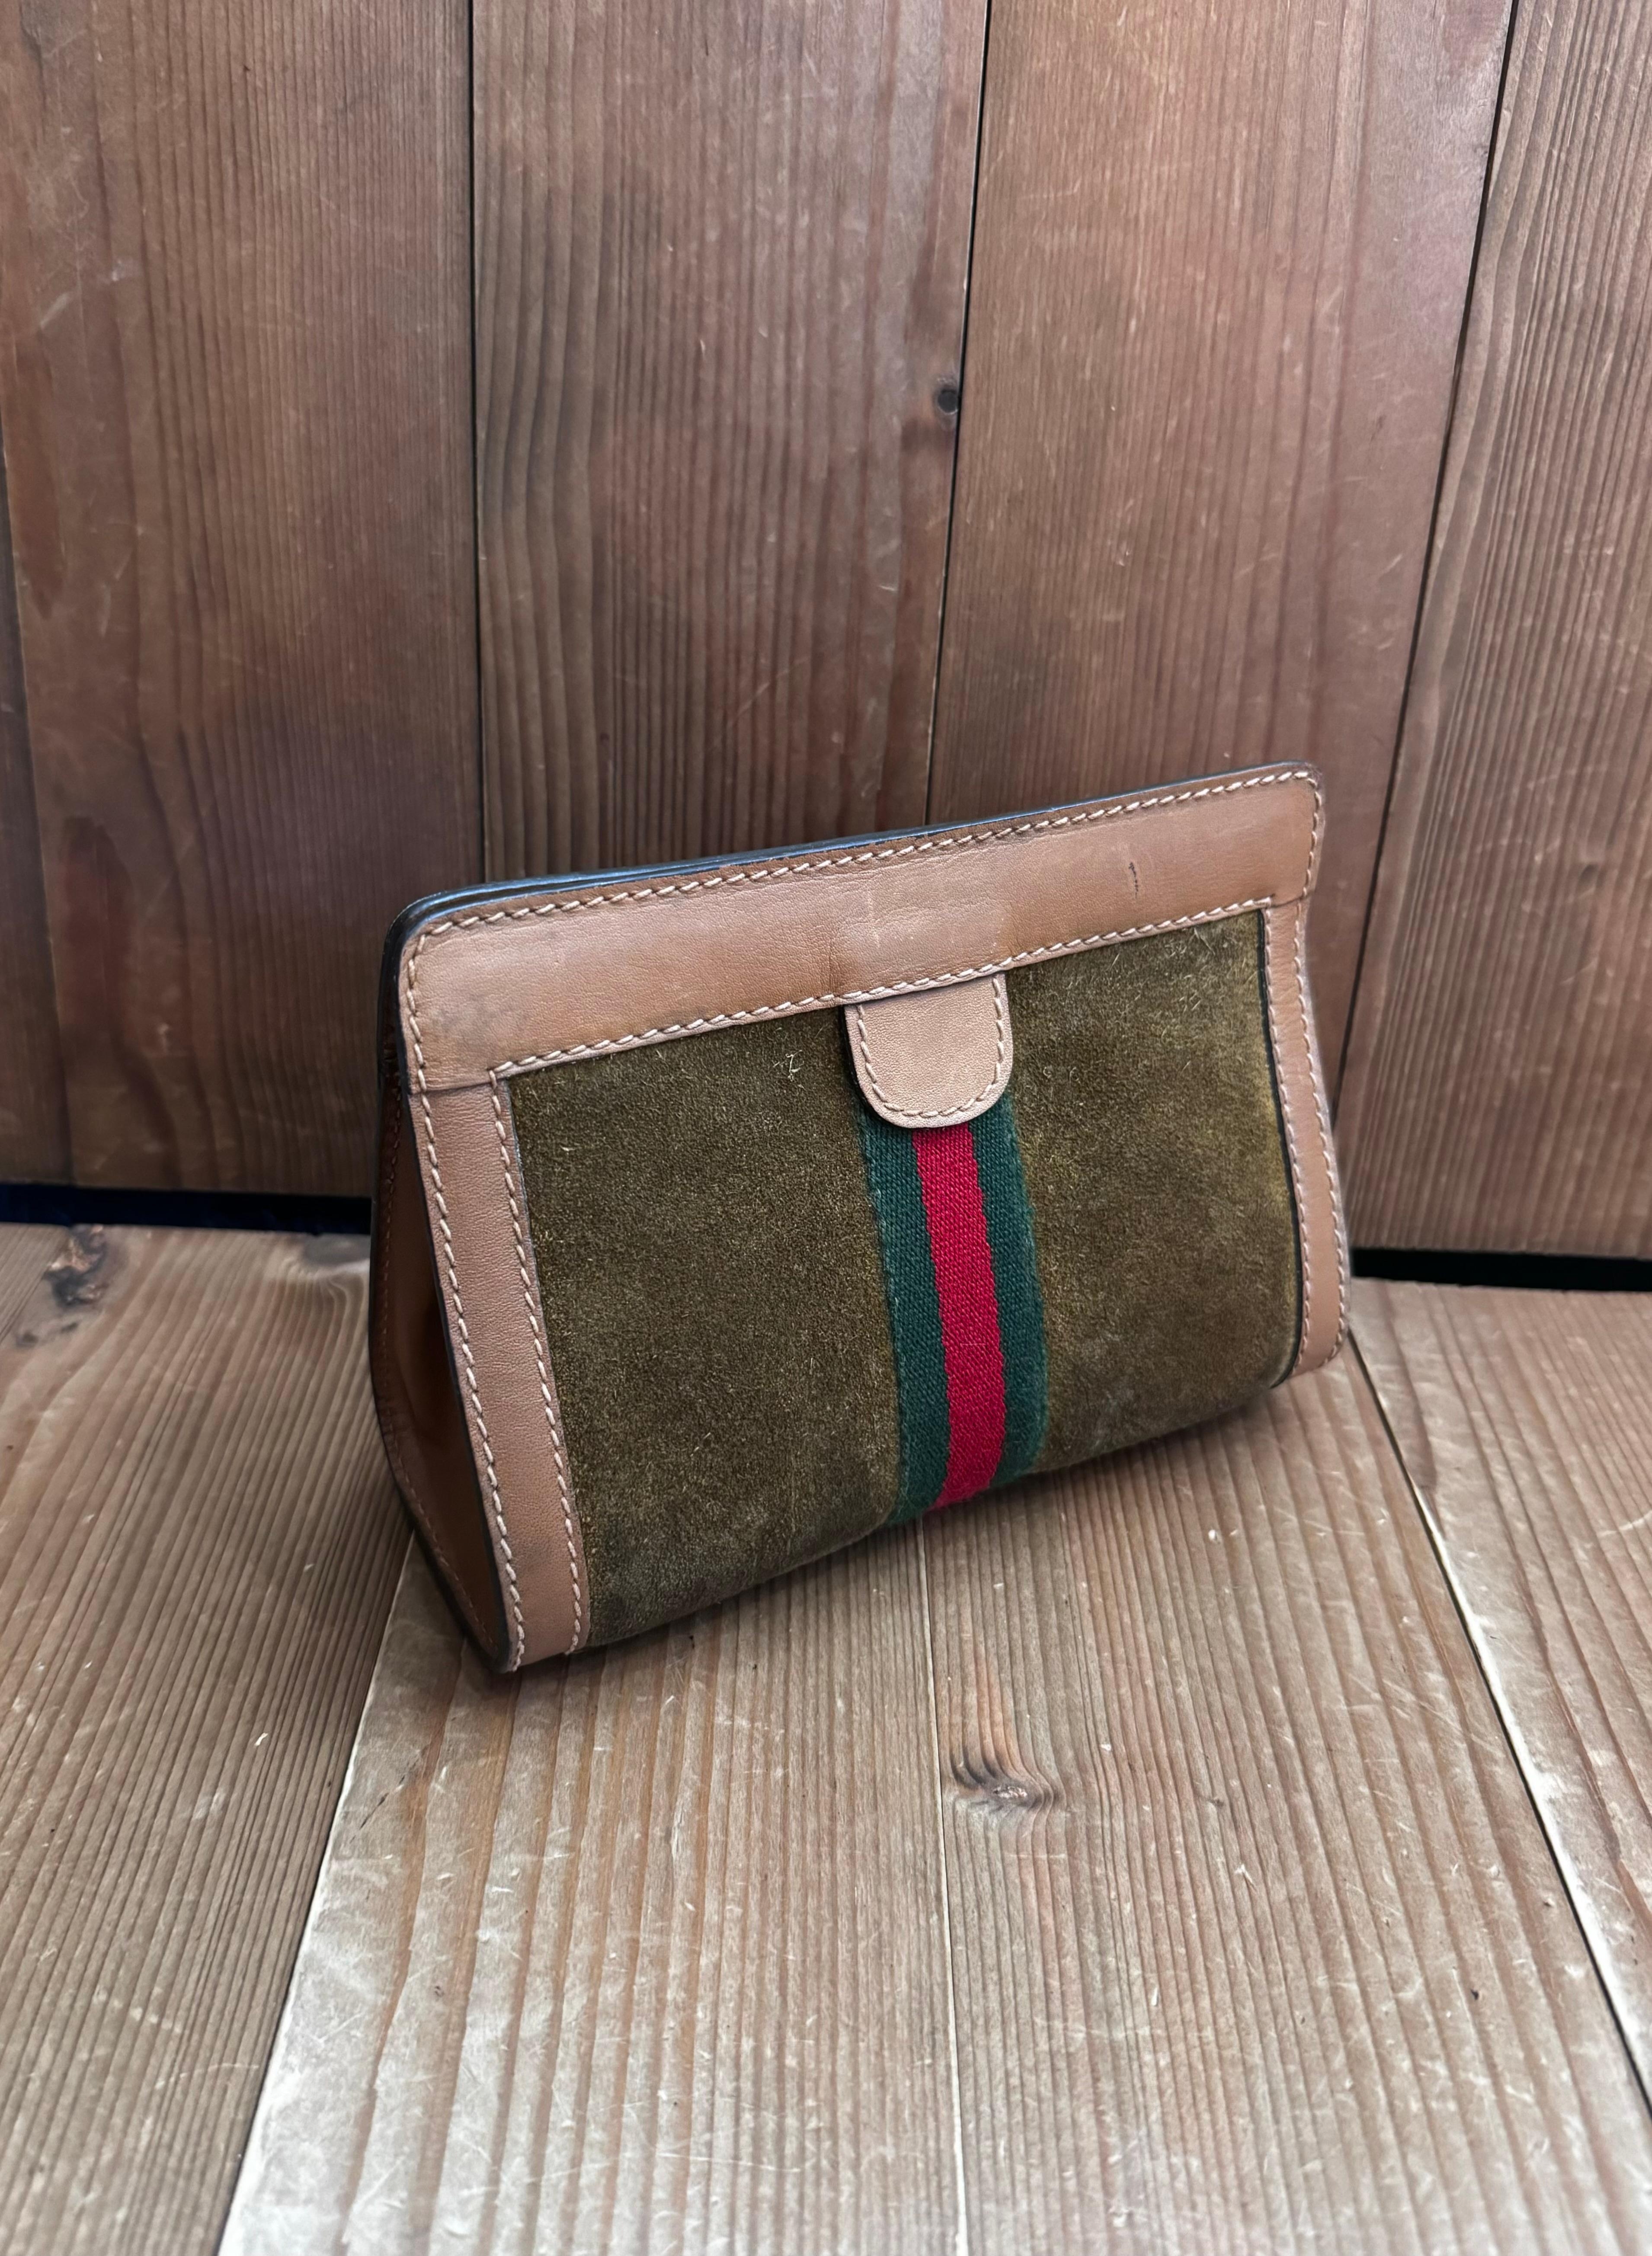 This vintage GUCCI pouch bag is crafted of suede and smooth calfskin leather in brown decorated with red/green stripe. Top velcro closure opens to laminated GG interior. Made in Italy. Measures approximately 7 x 5 x 3 inches.

Condition - Good